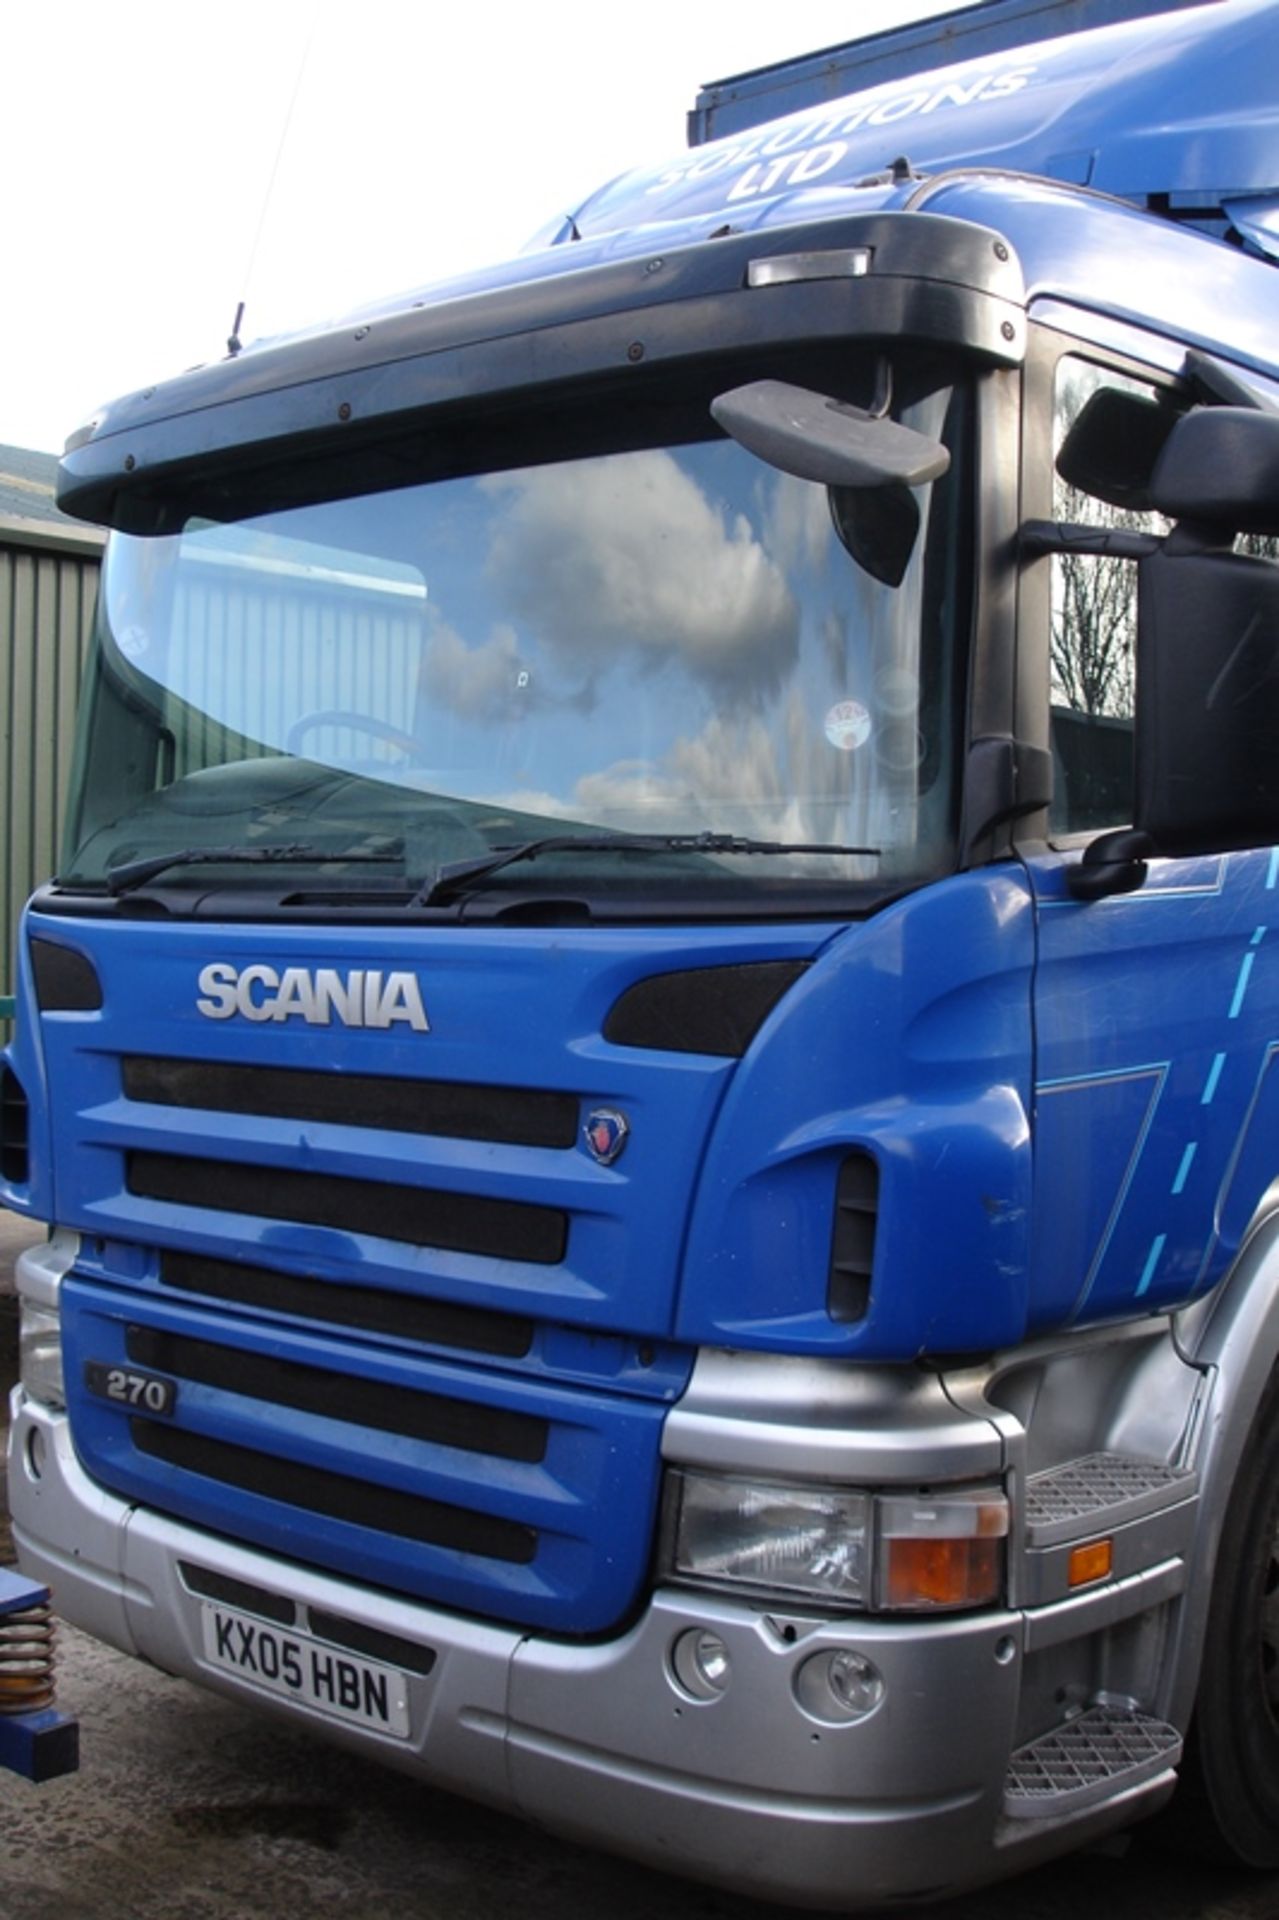 Scania P270 Curtain Sided Truck - Image 4 of 4